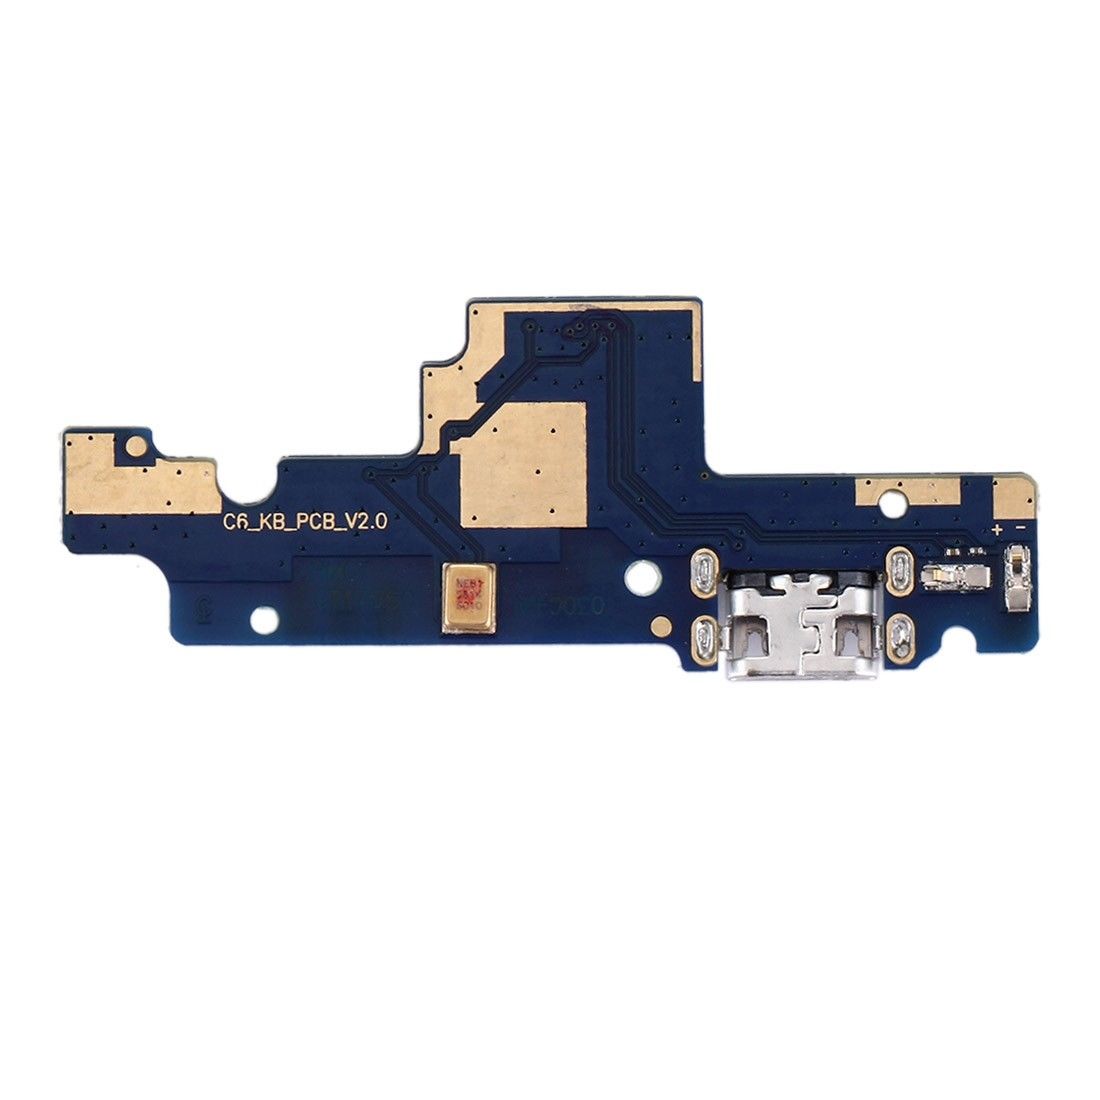 Xiaomi Redmi Note 4x Charging Port Board With Microphone for [product_price] - First Help Tech